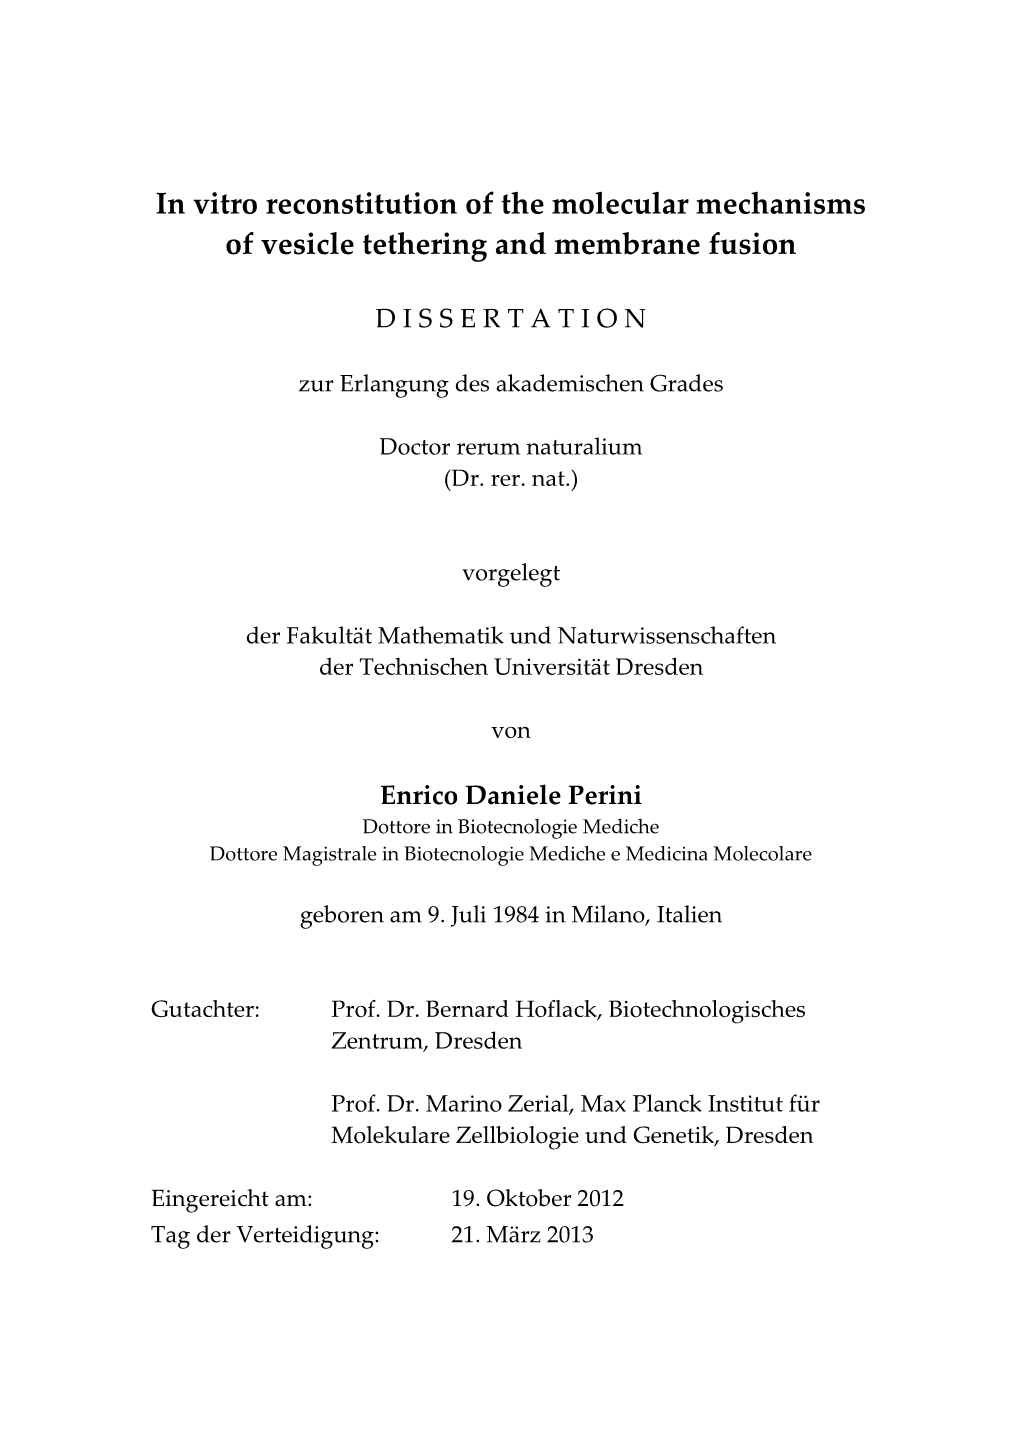 In Vitro Reconstitution of the Molecular Mechanisms of Vesicle Tethering and Membrane Fusion